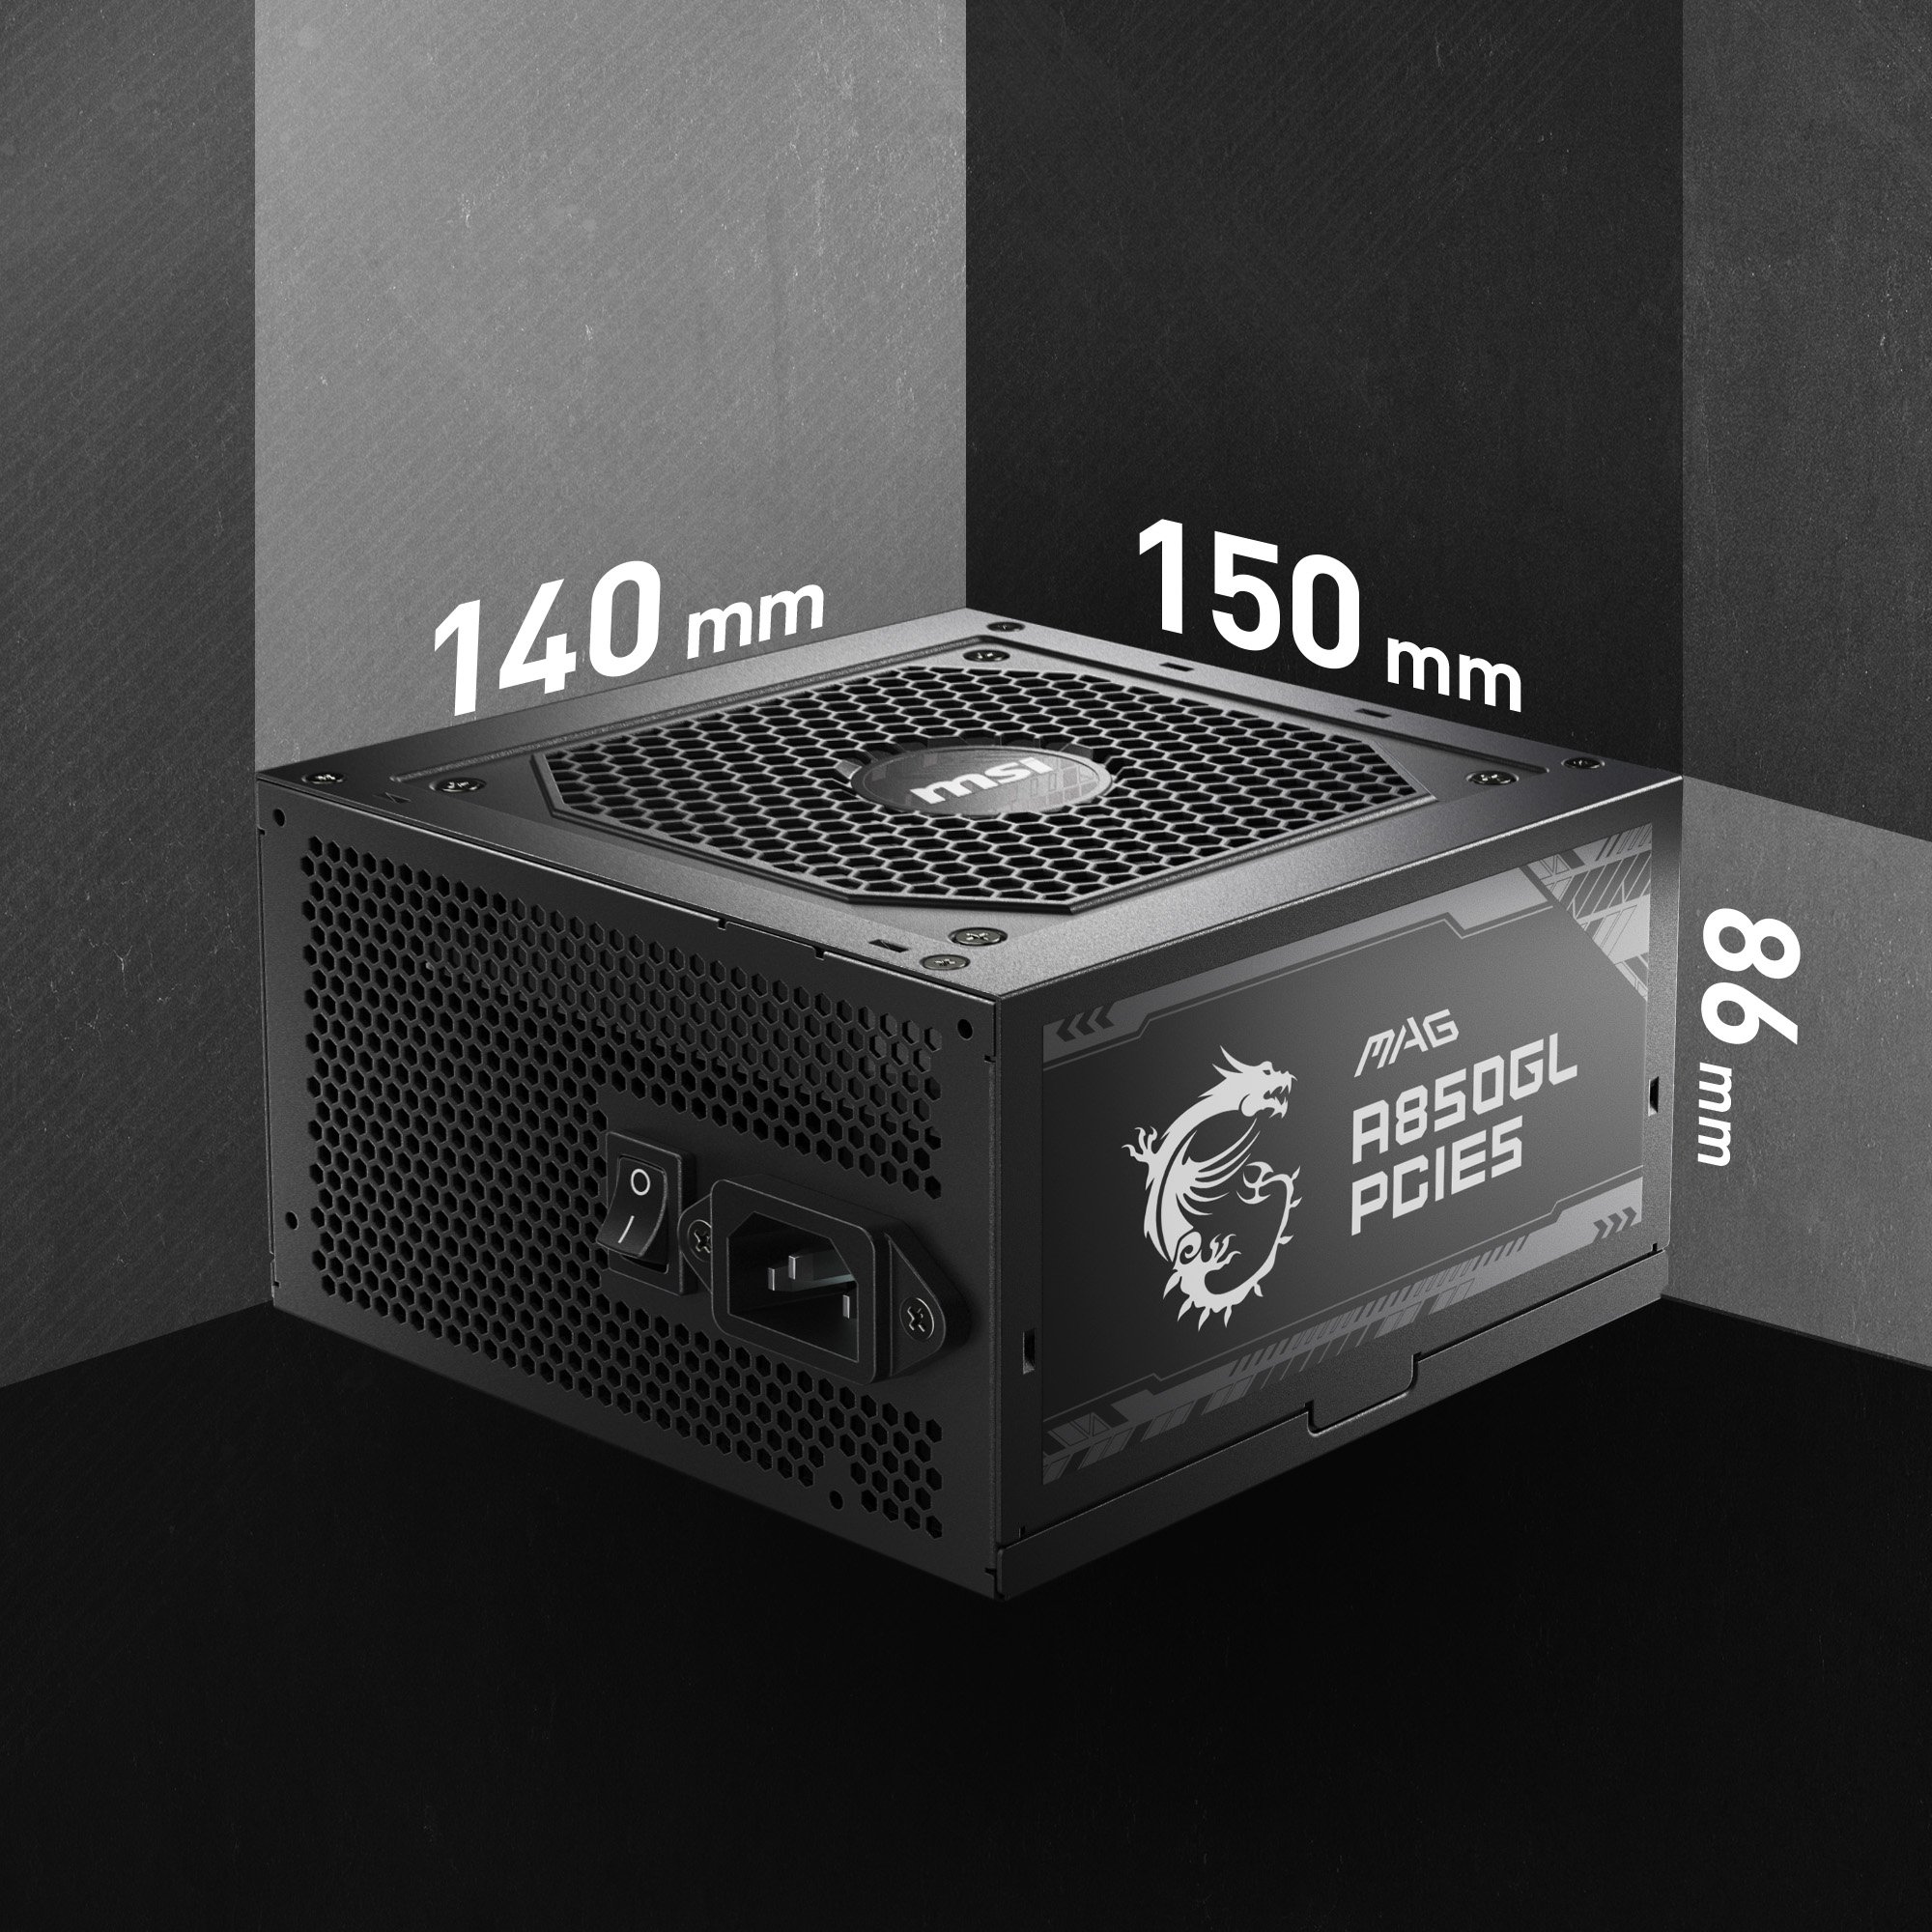 MSI MAG A850GL PCIE 5 & ATX 3.0 Gaming Power Supply - Full Modular - 80  Plus Gold Certified 850W - Compact Size - ATX PSU